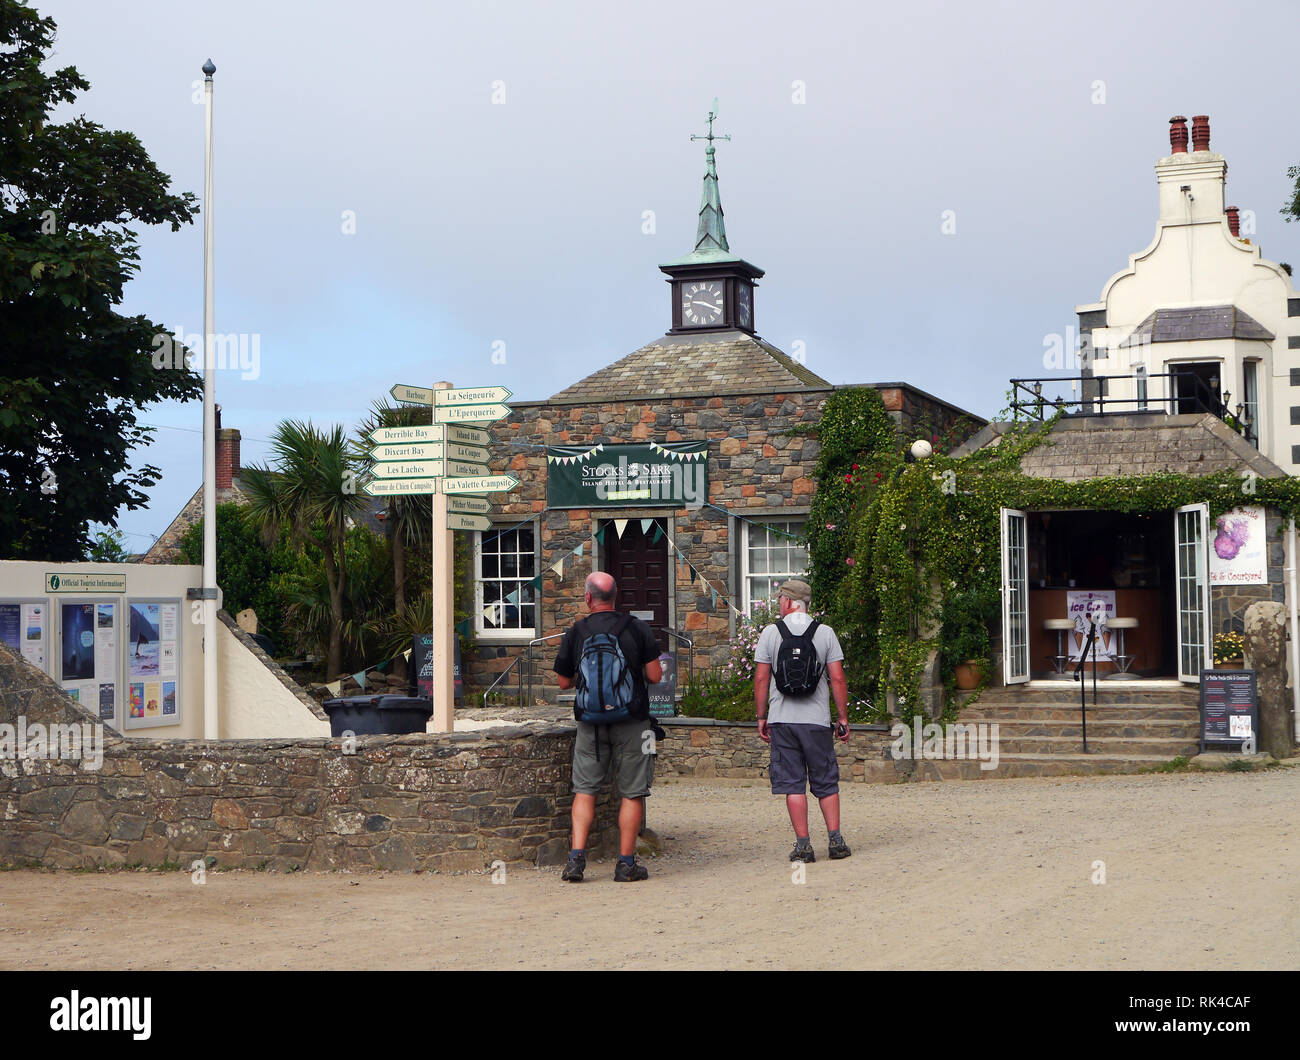 Two Men Hikers Looking at the Wooden Signpost on the Avenue in the Village at the Centre of the Island of Sark, Channel Islands, UK. Stock Photo